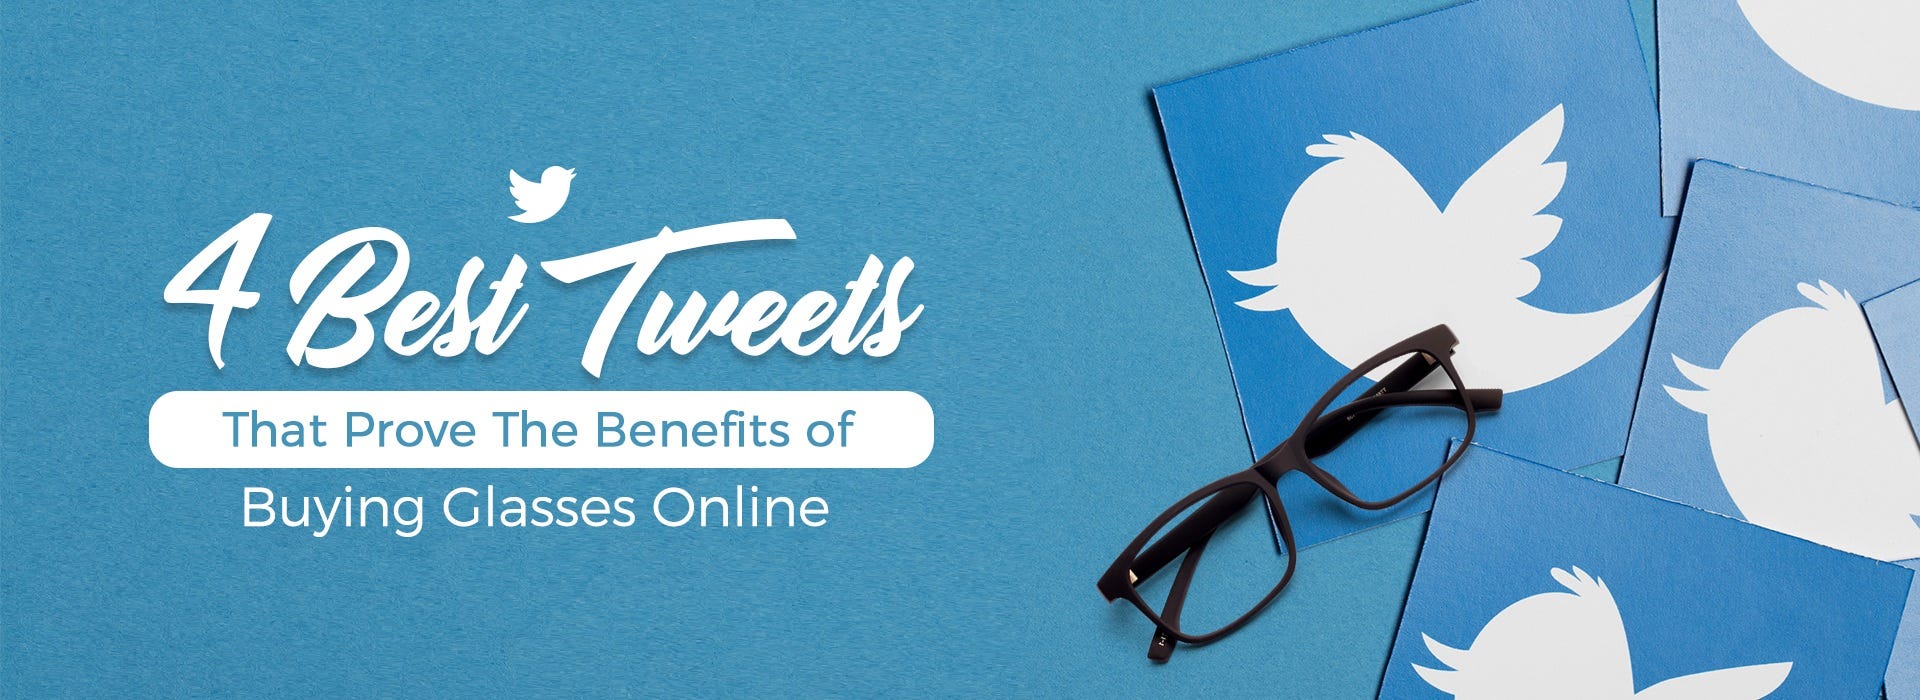 4 BEST TWEETS THAT PROVE THE BENEFITS OF BUYING GLASSES ONLINE